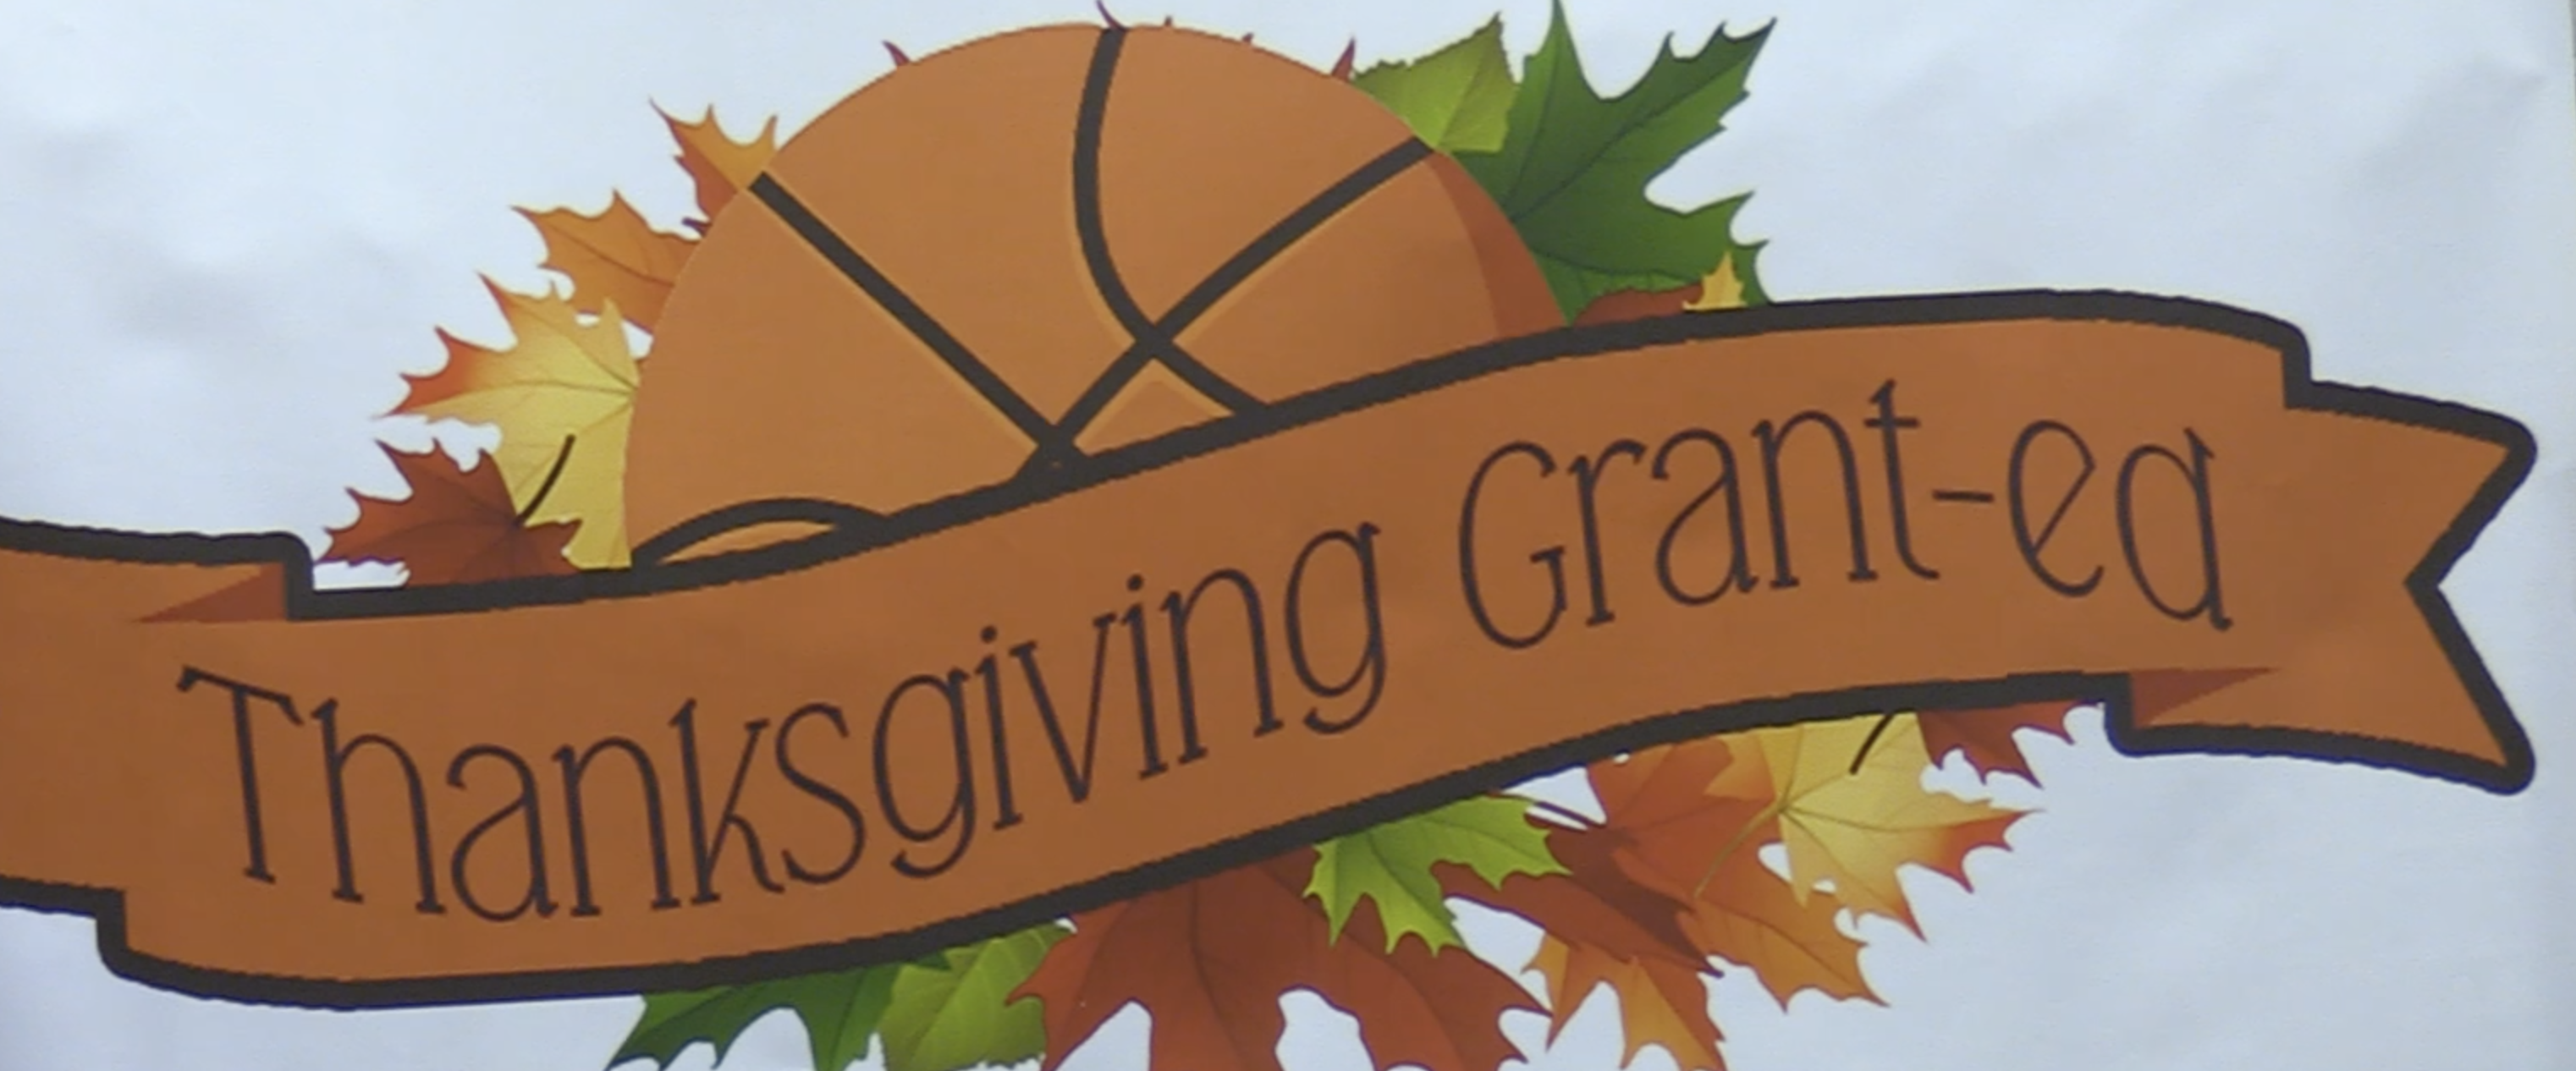 NBA’s Jerami Grant’s Hour Generation Foundation Provides Thanksgiving Baskets for the Community